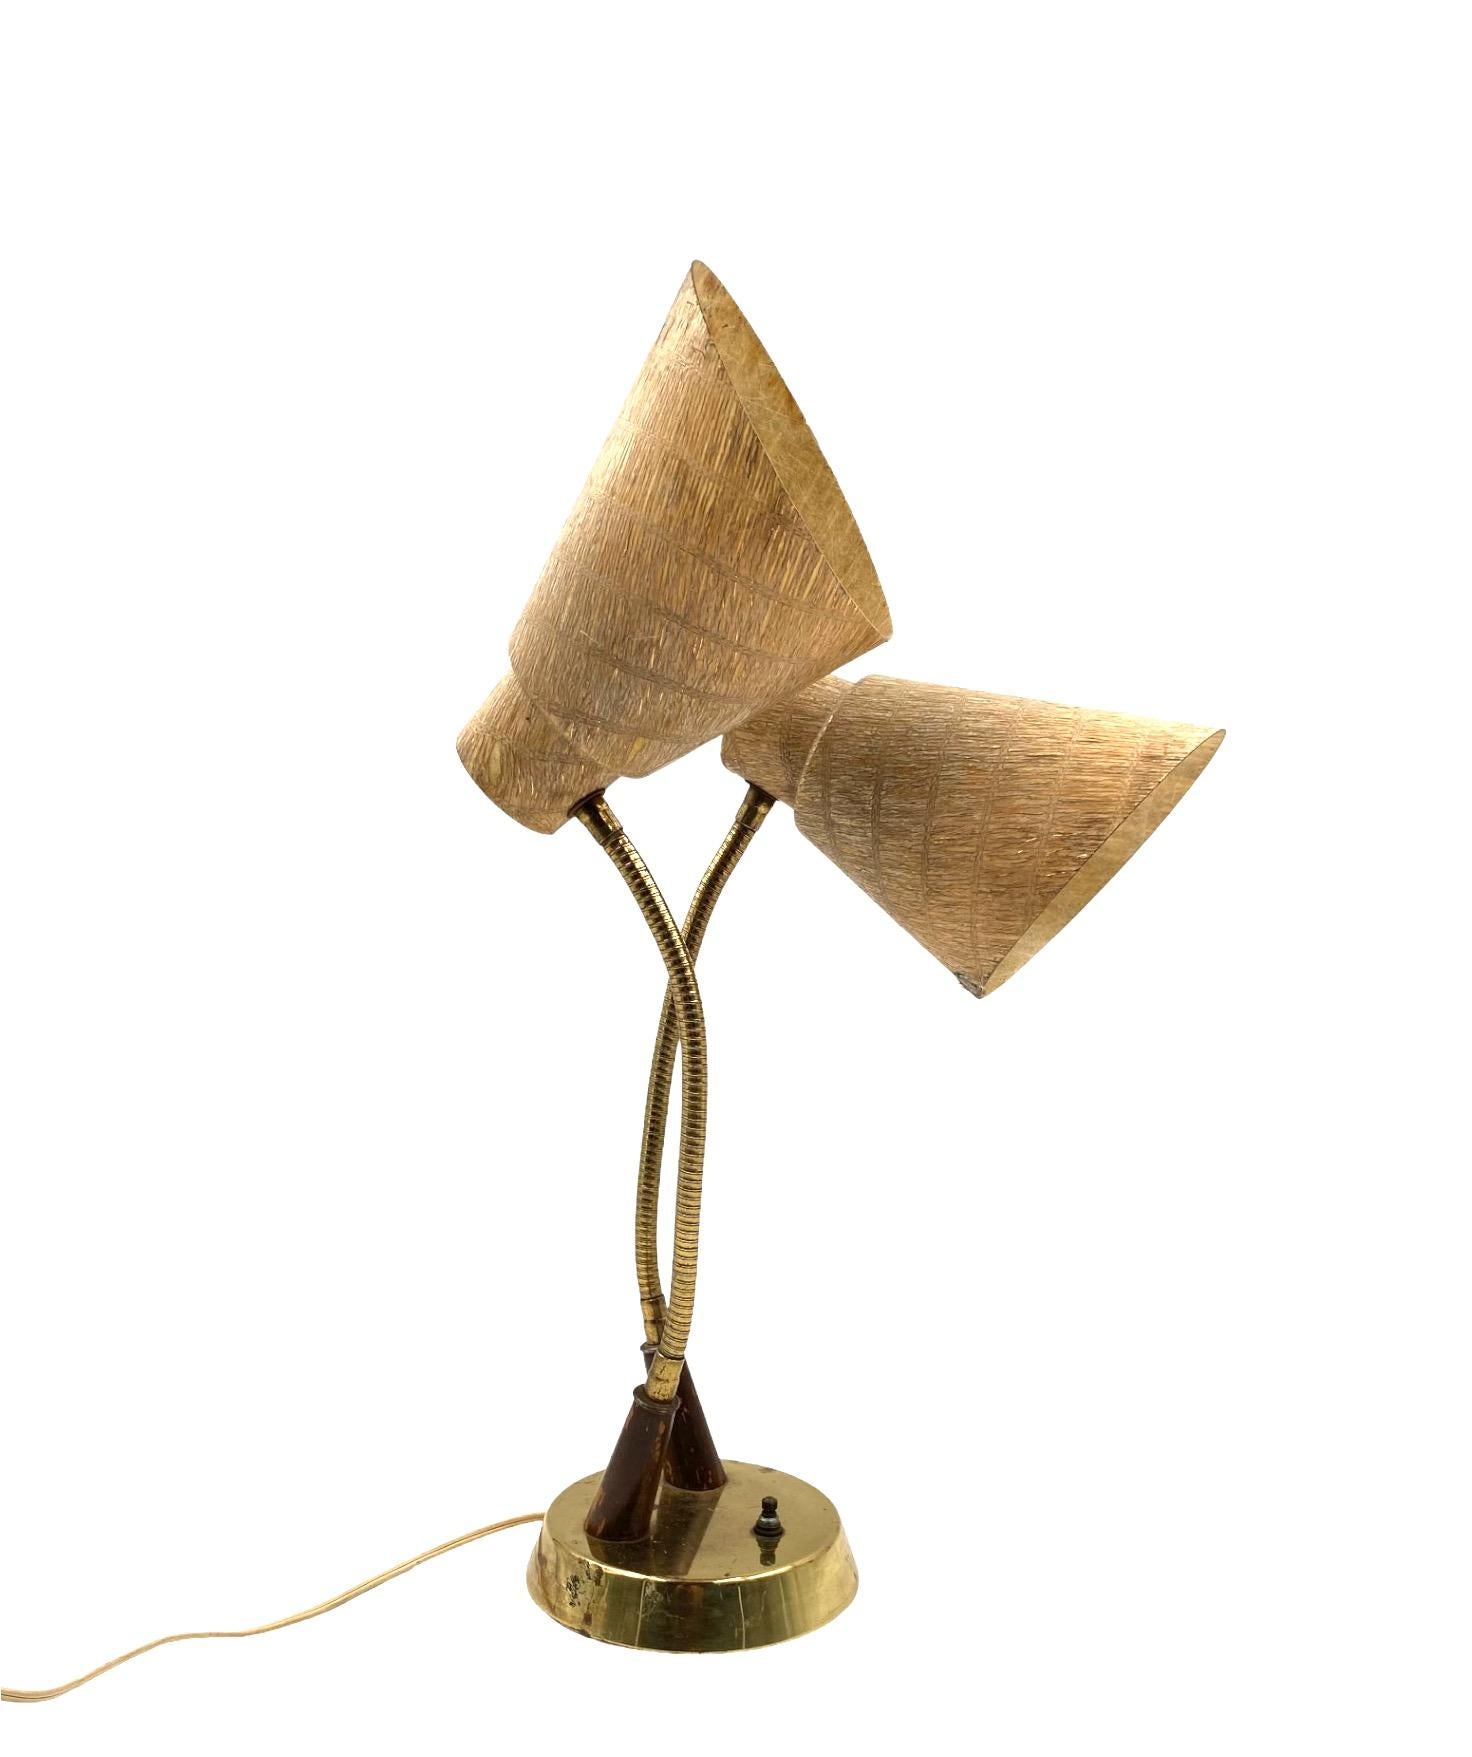 Mid-century modern two lights lamp 

France circa 1960

Brass, wood, fiberglass

H 56 cm Diam. 31 cm

Conditions: good consistent with age and use. Little damage on one shade